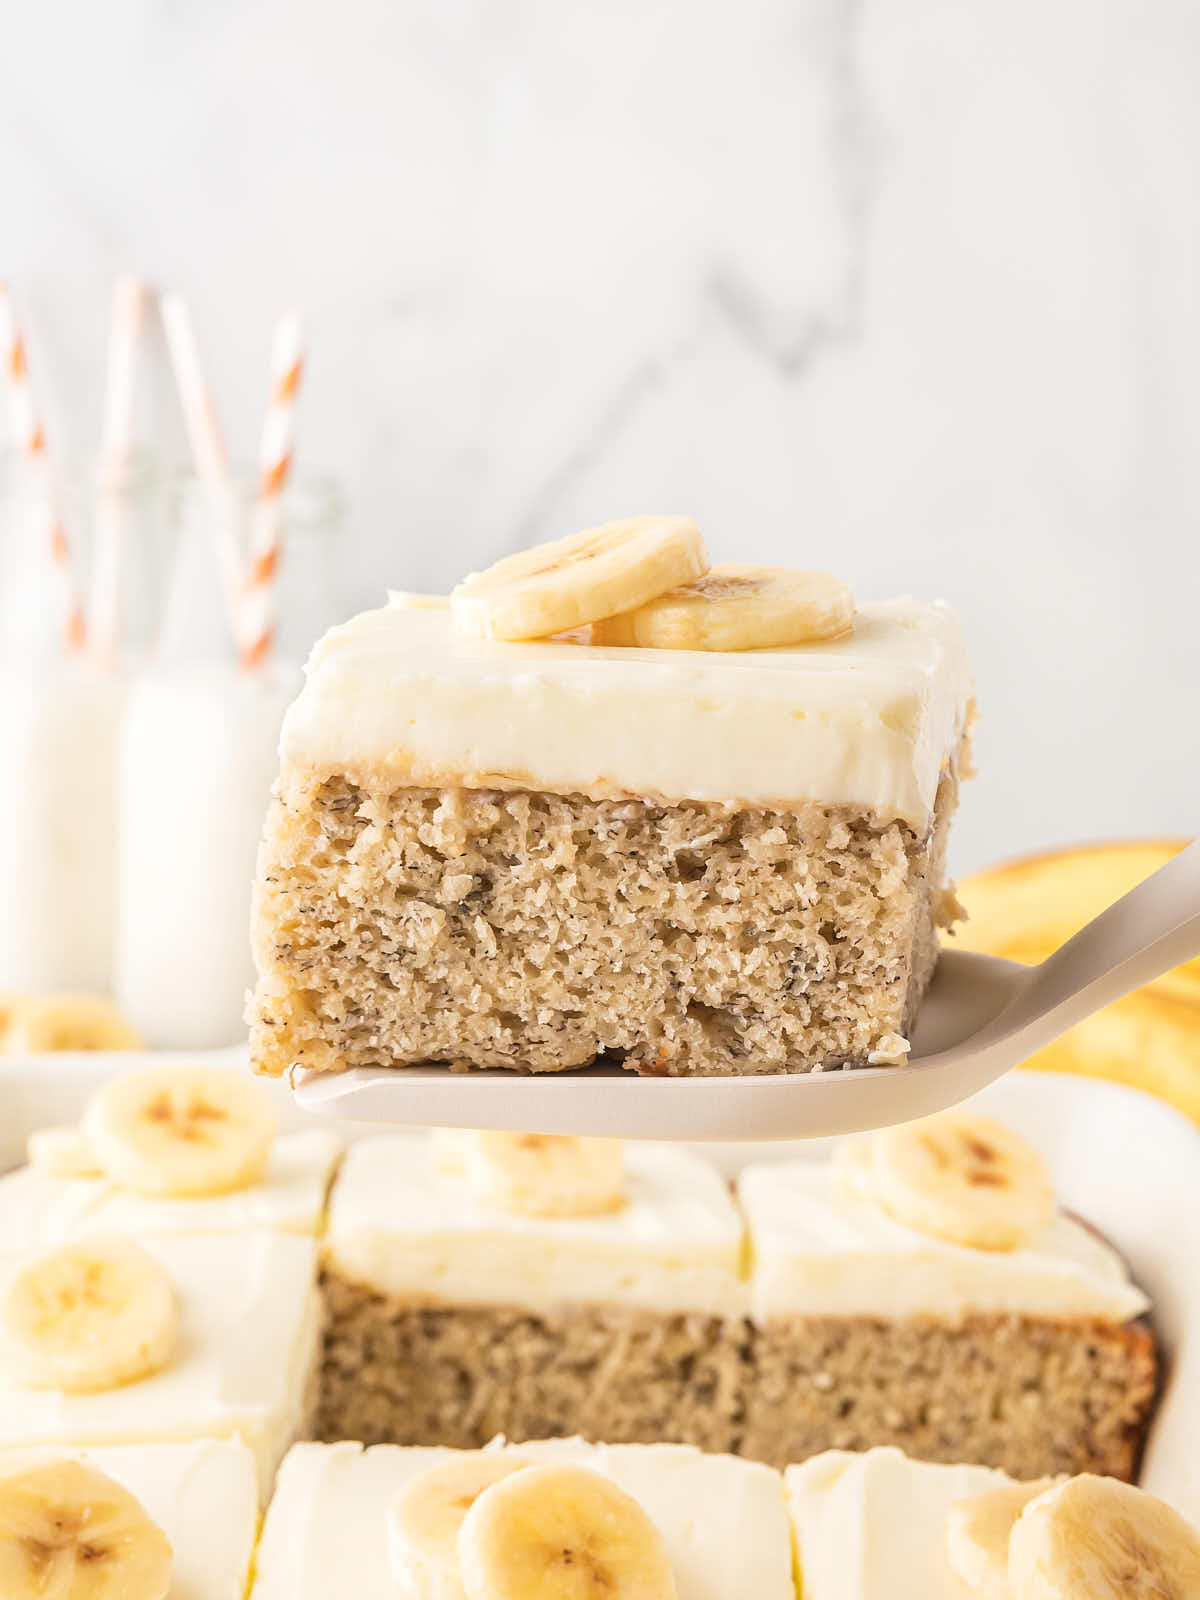 A slice of Banana Cake with Sour Cream Frosting and decorated with banana slices served on a large spoon.